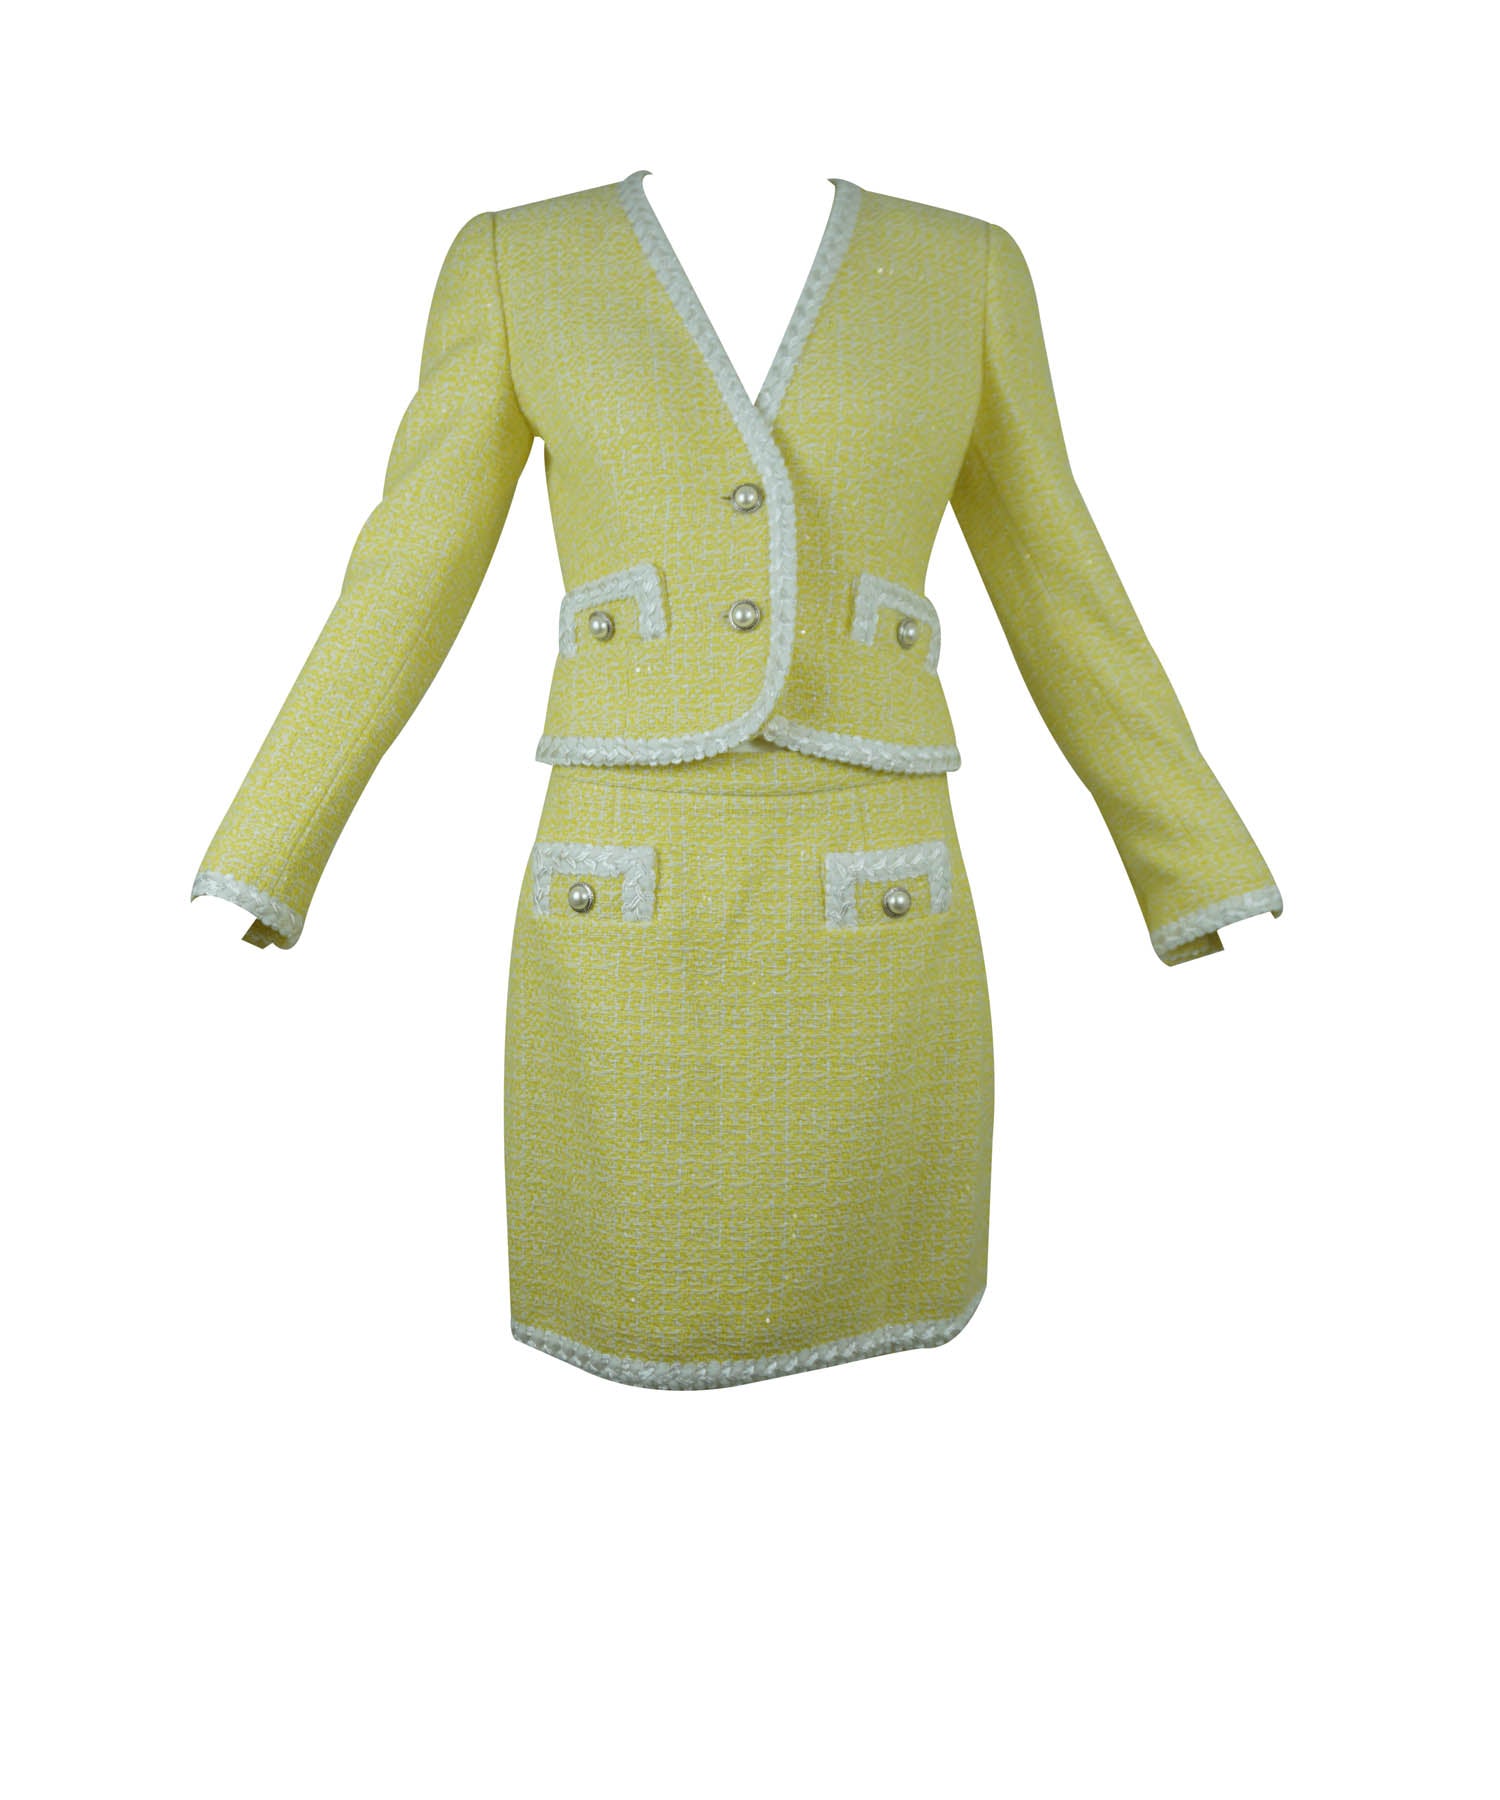 Chanel by Karl Lagerfeld Yellow Tweed Jacket and Skirt Suit, SS 1998